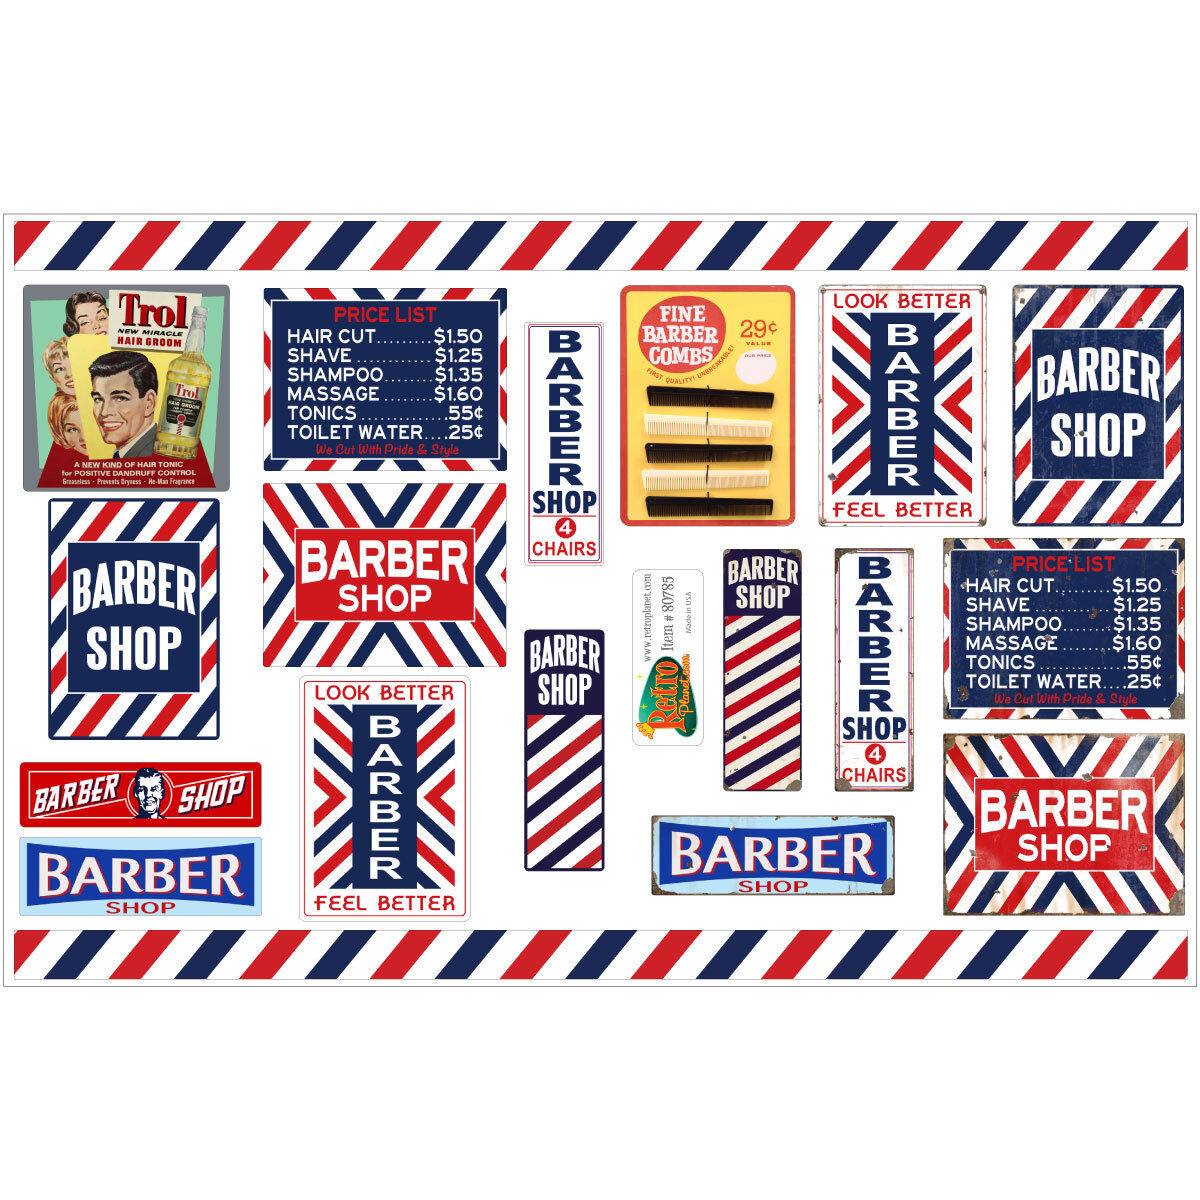 Barber Shop Haircut Vinyl Sticker Sheet of 19 Vintage Style Decorations Decals